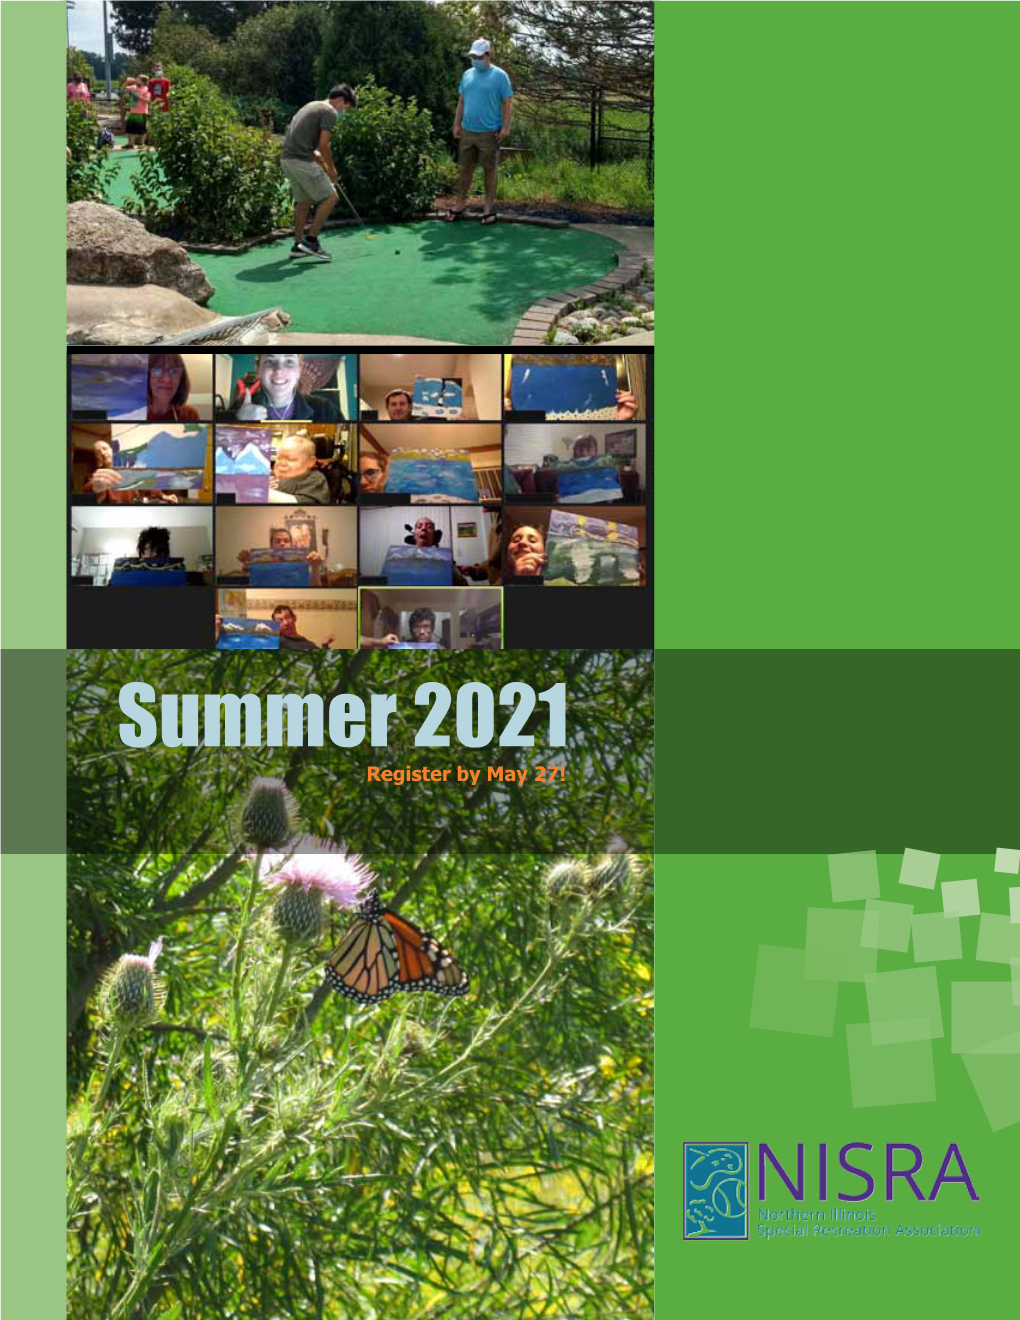 Summer 2021 Register by May 27! Greetings! We’Re Offering Additional Programs Each Season As Restore Illinois Progresses